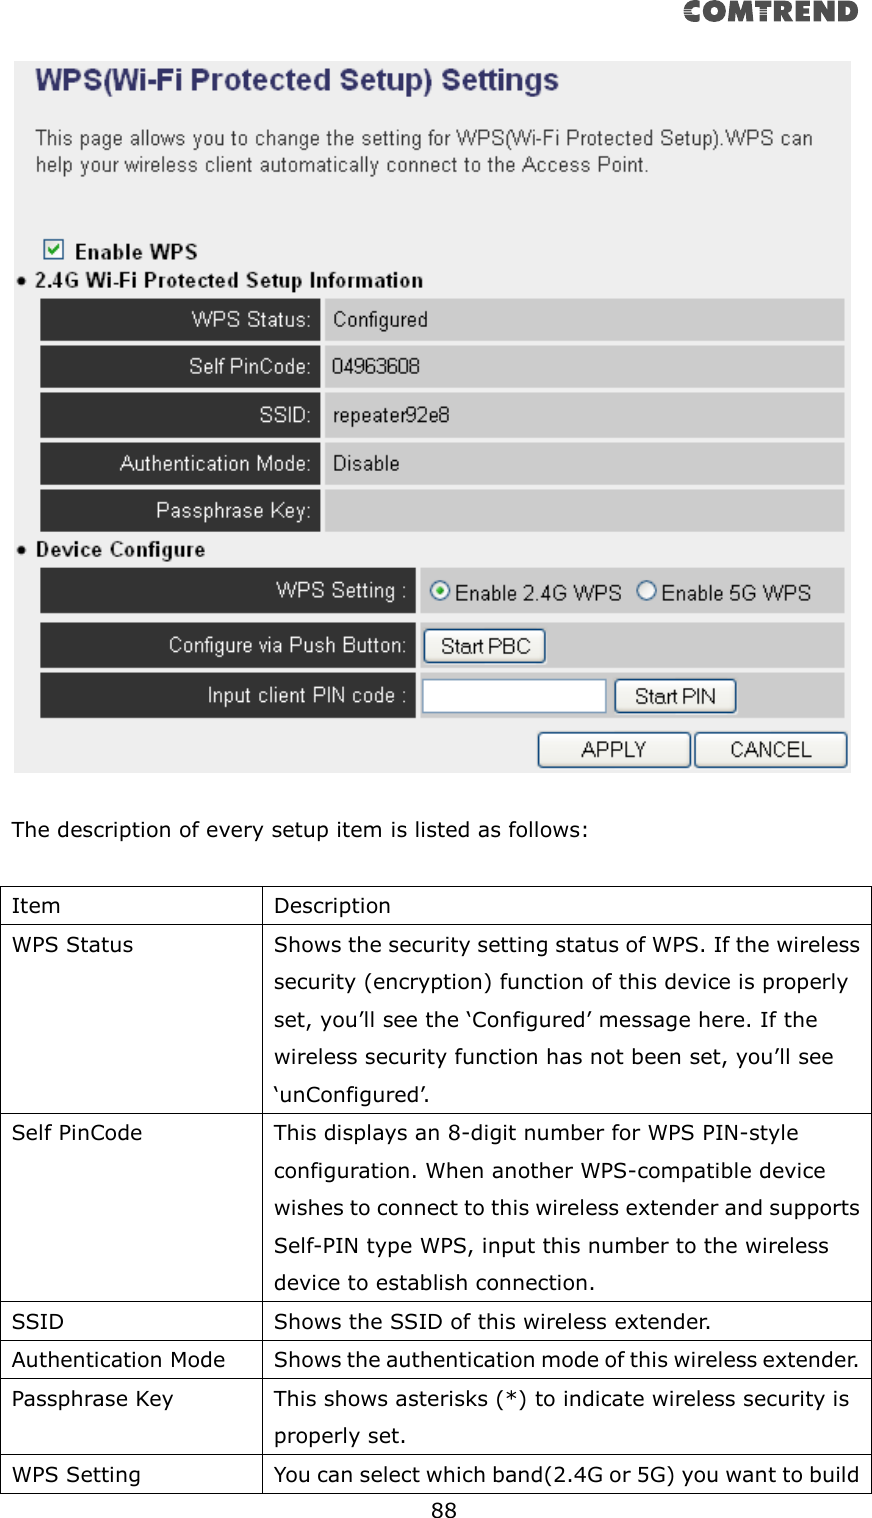       88    The description of every setup item is listed as follows:  Item Description WPS Status Shows the security setting status of WPS. If the wireless security (encryption) function of this device is properly set, you’ll see the ‘Configured’ message here. If the wireless security function has not been set, you’ll see ‘unConfigured’. Self PinCode This displays an 8-digit number for WPS PIN-style configuration. When another WPS-compatible device wishes to connect to this wireless extender and supports Self-PIN type WPS, input this number to the wireless device to establish connection. SSID Shows the SSID of this wireless extender. Authentication Mode Shows the authentication mode of this wireless extender. Passphrase Key This shows asterisks (*) to indicate wireless security is properly set. WPS Setting You can select which band(2.4G or 5G) you want to build 